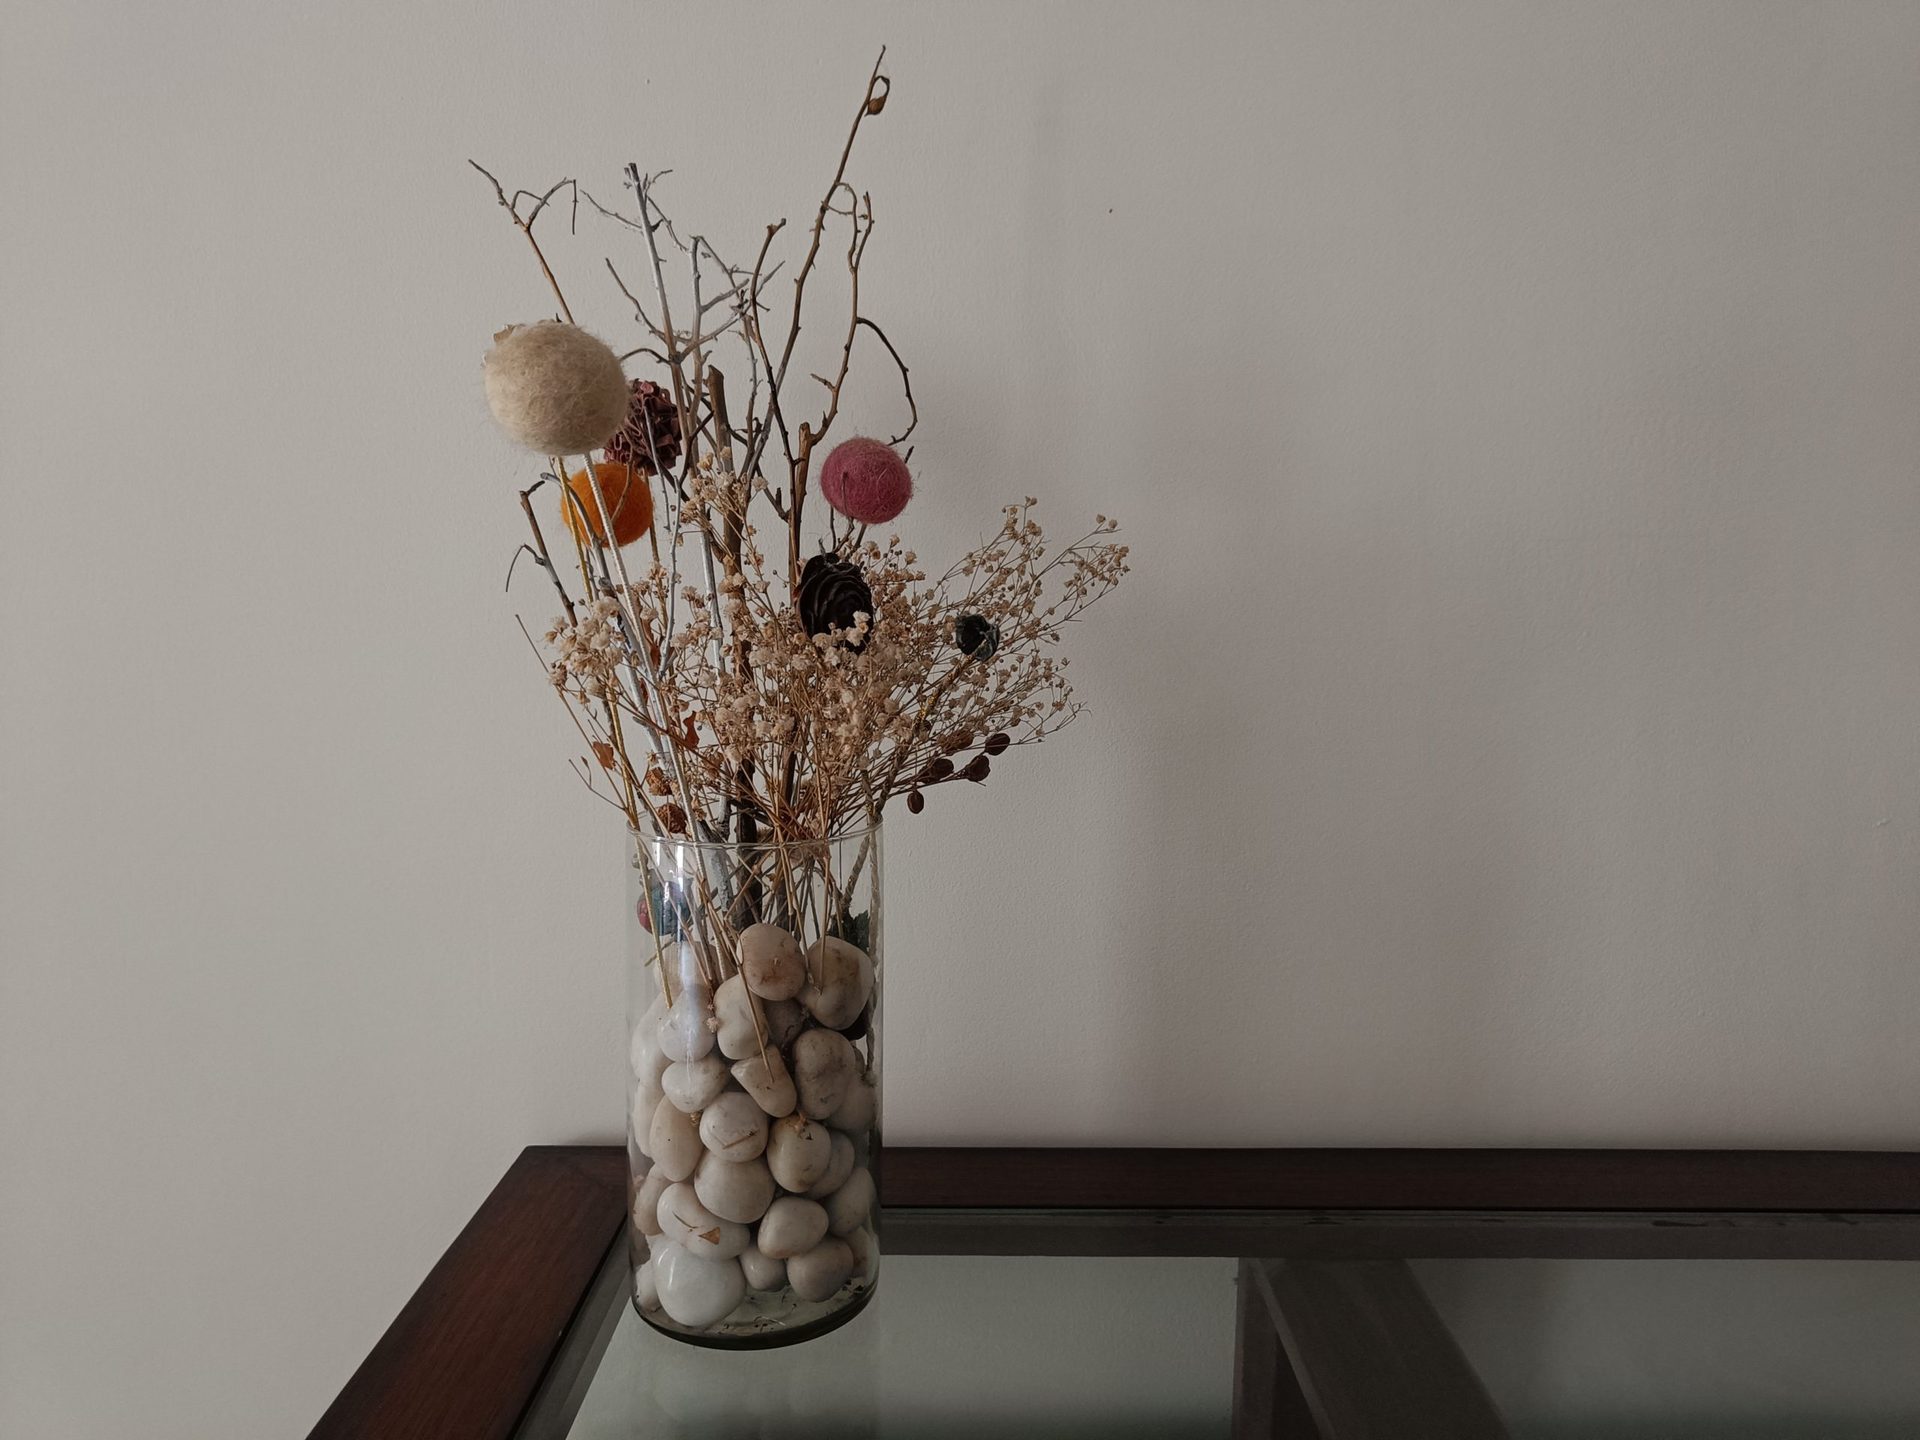 realme 9 Pro Plus dim light shot of a table with a glass vase on it containing pebbles and dried flowers.